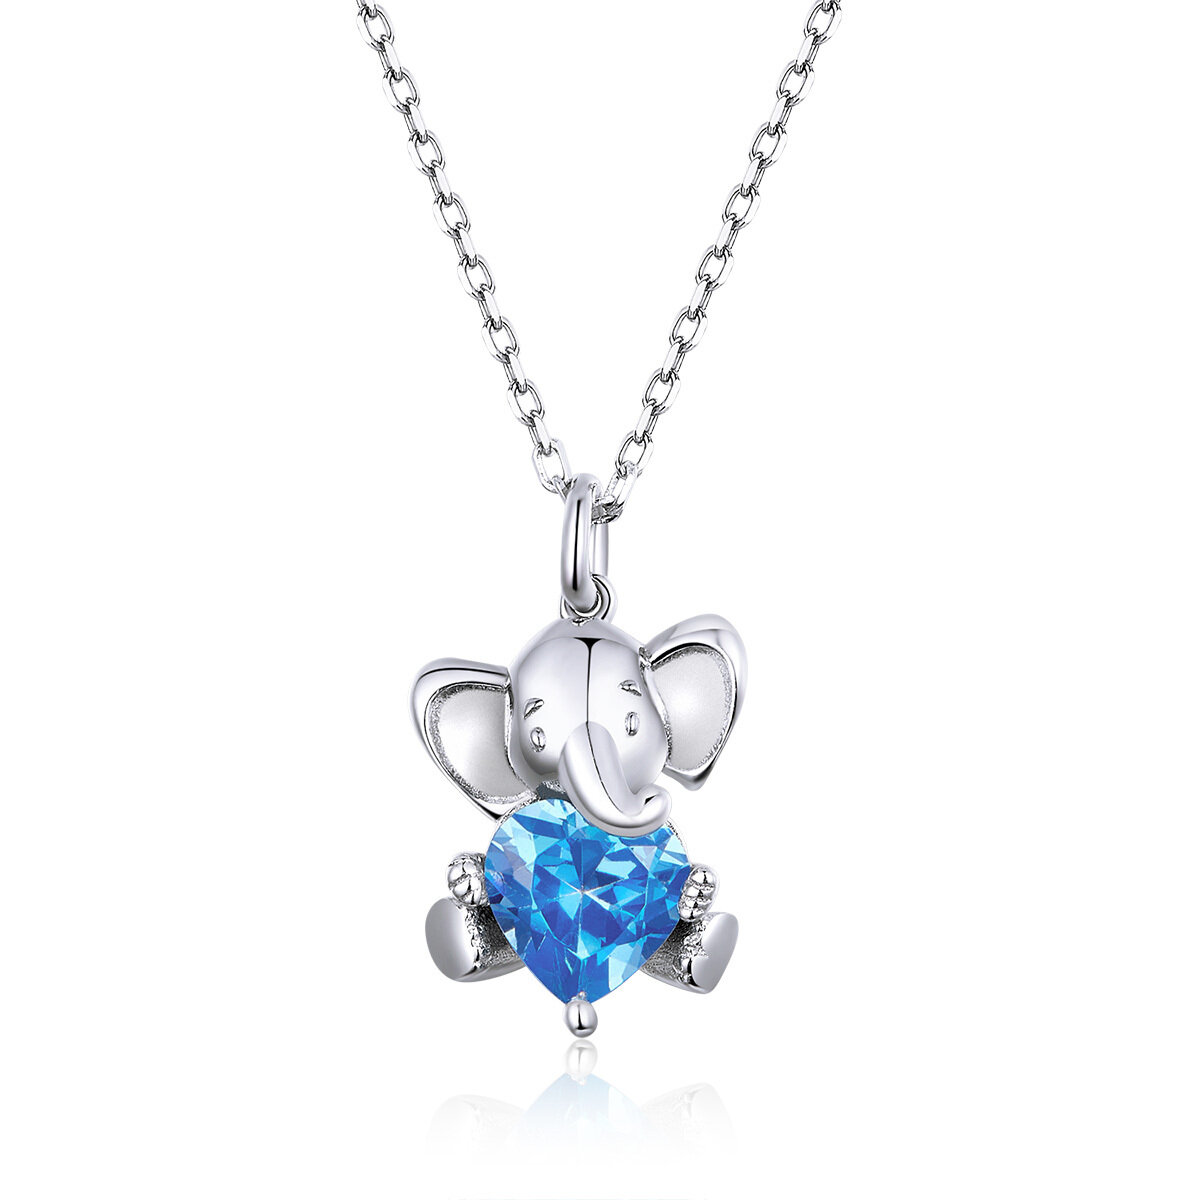 GemKing BSN180 Cute elephant S925 Sterling Silver Necklace